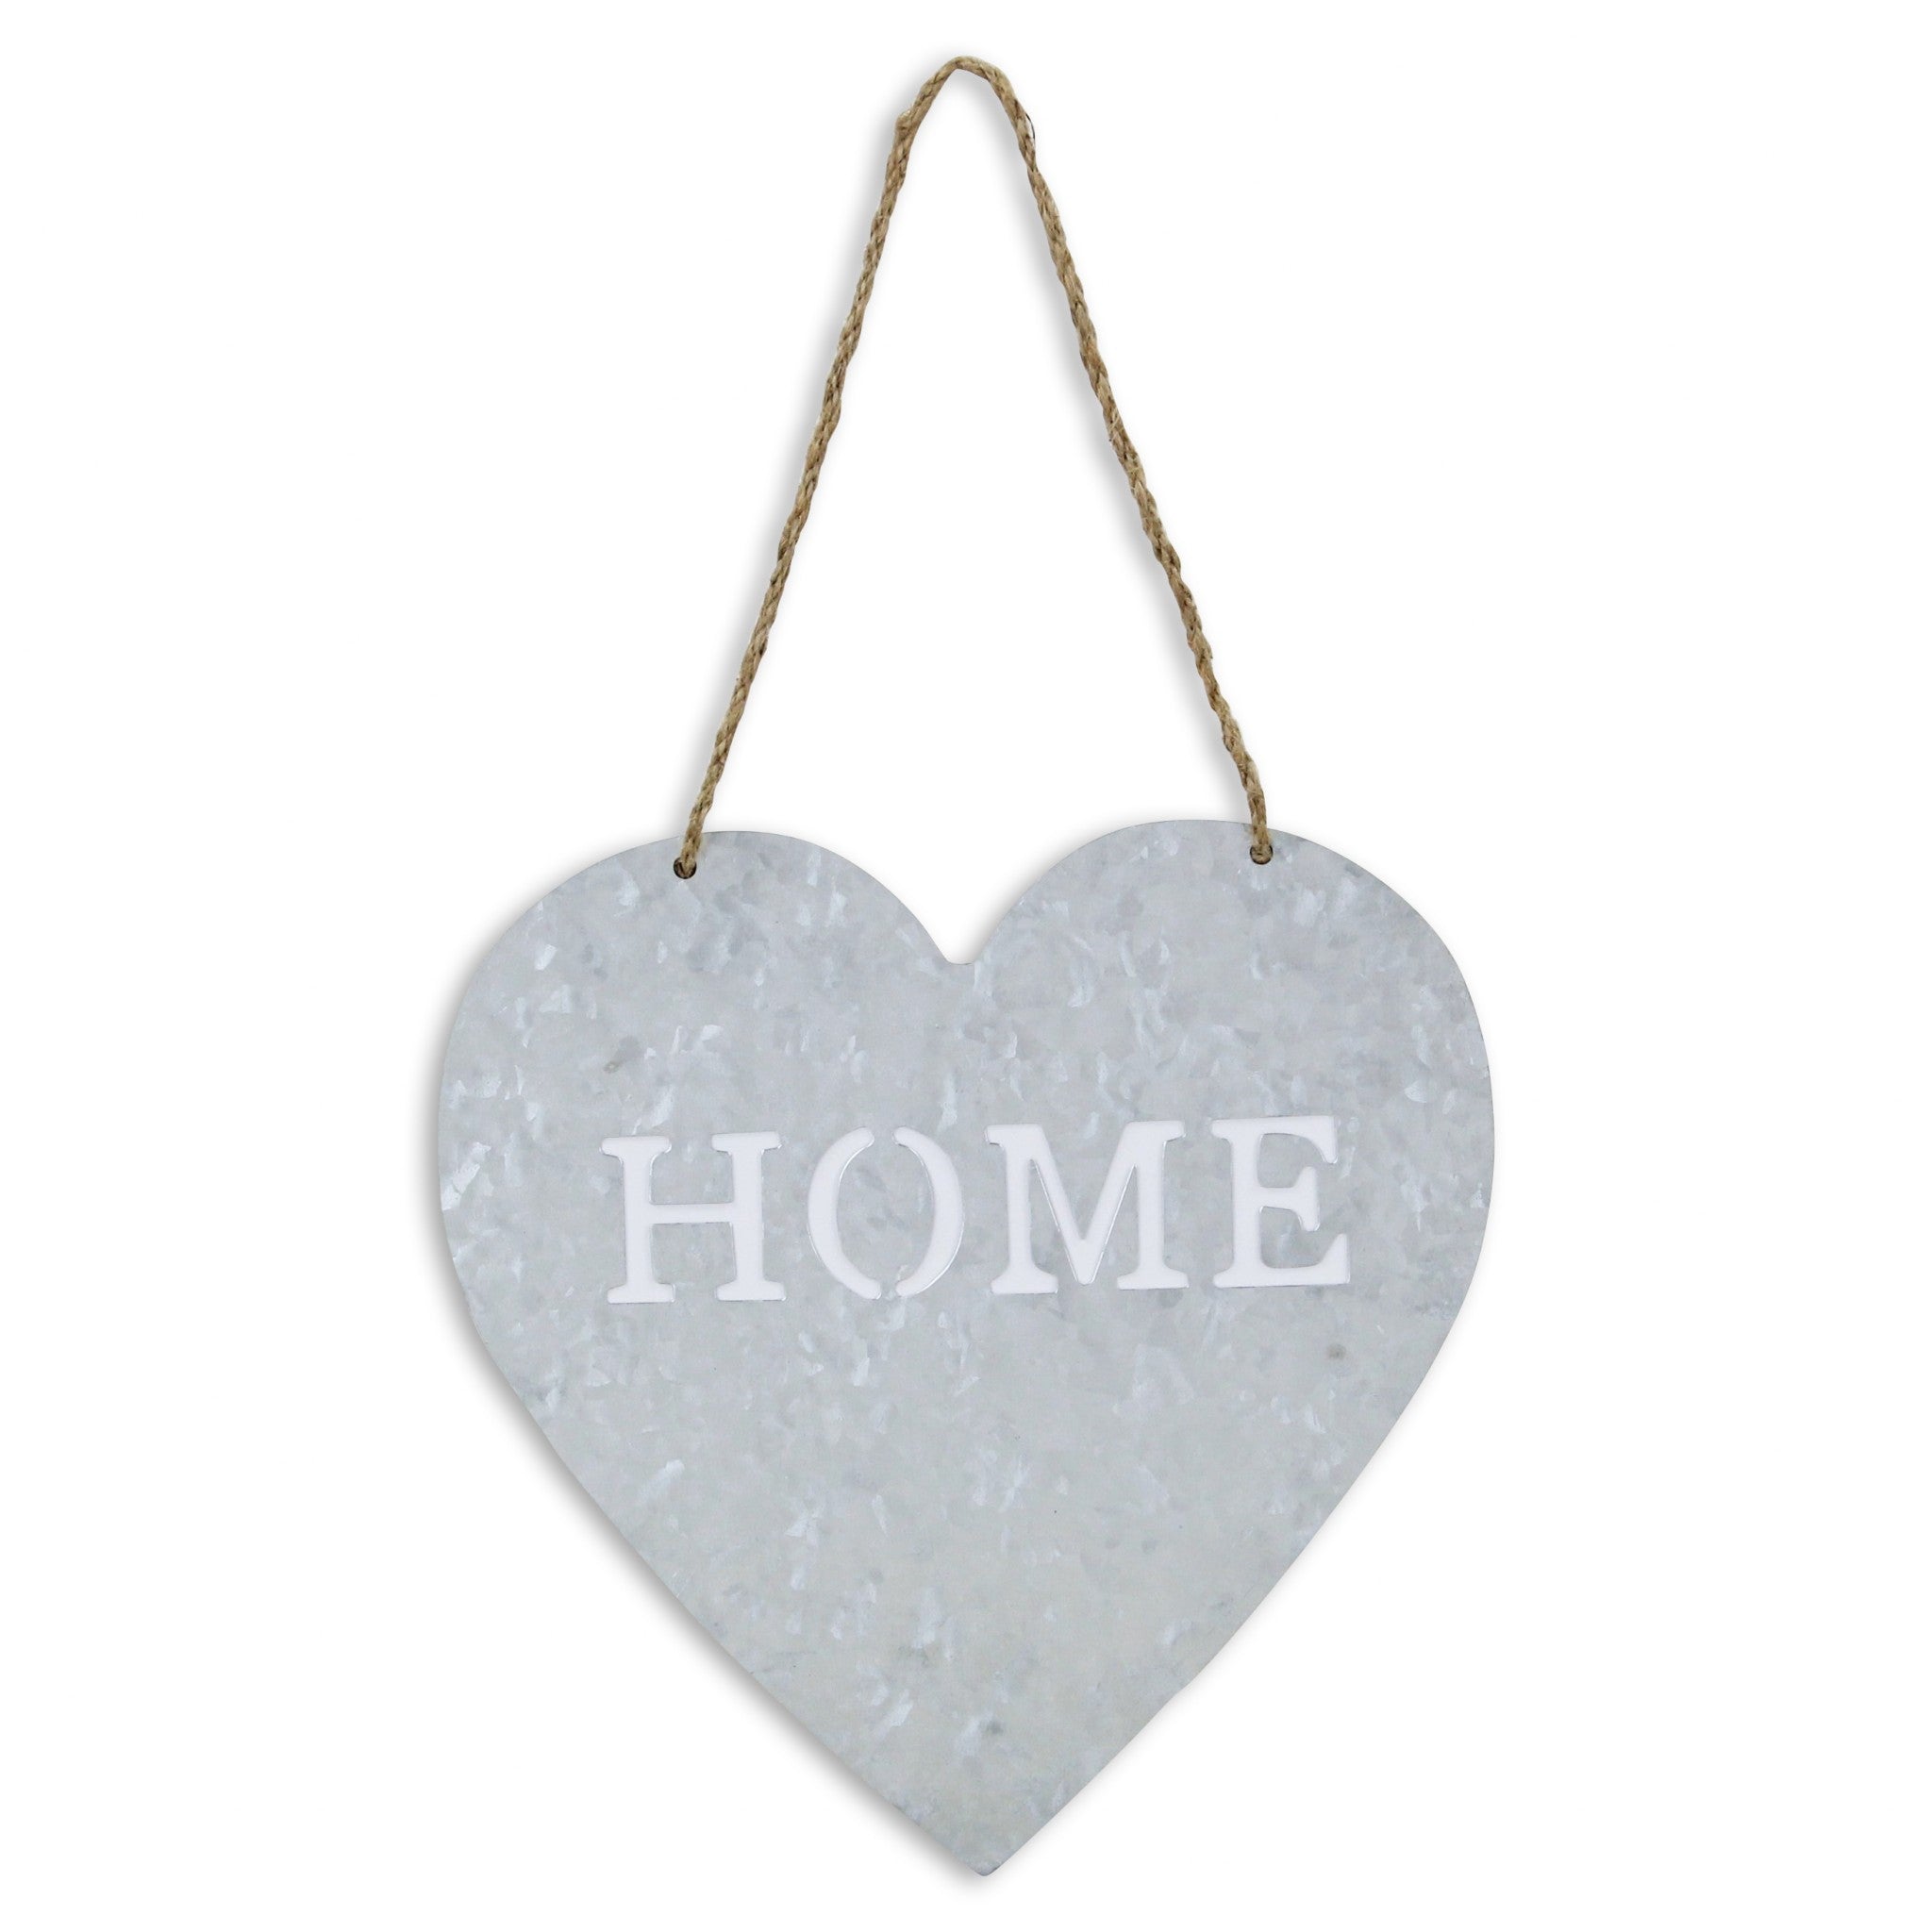 Home Gray Galvanized Cut Out Metal Wall Decor